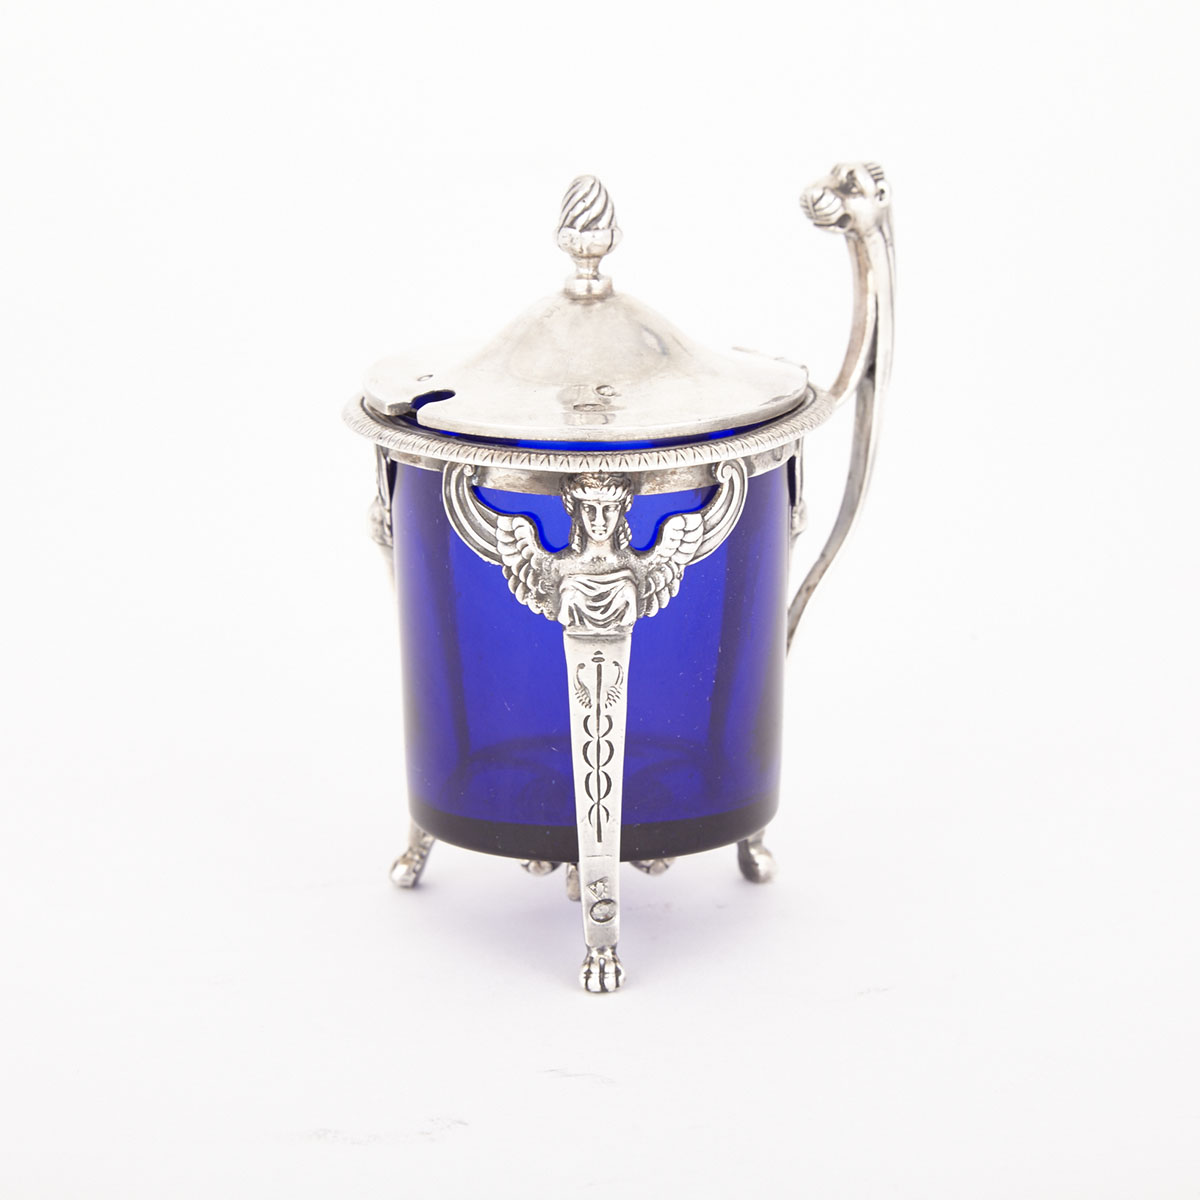 French Silver Mustard Pot, Paris, late 18th/early 19th century